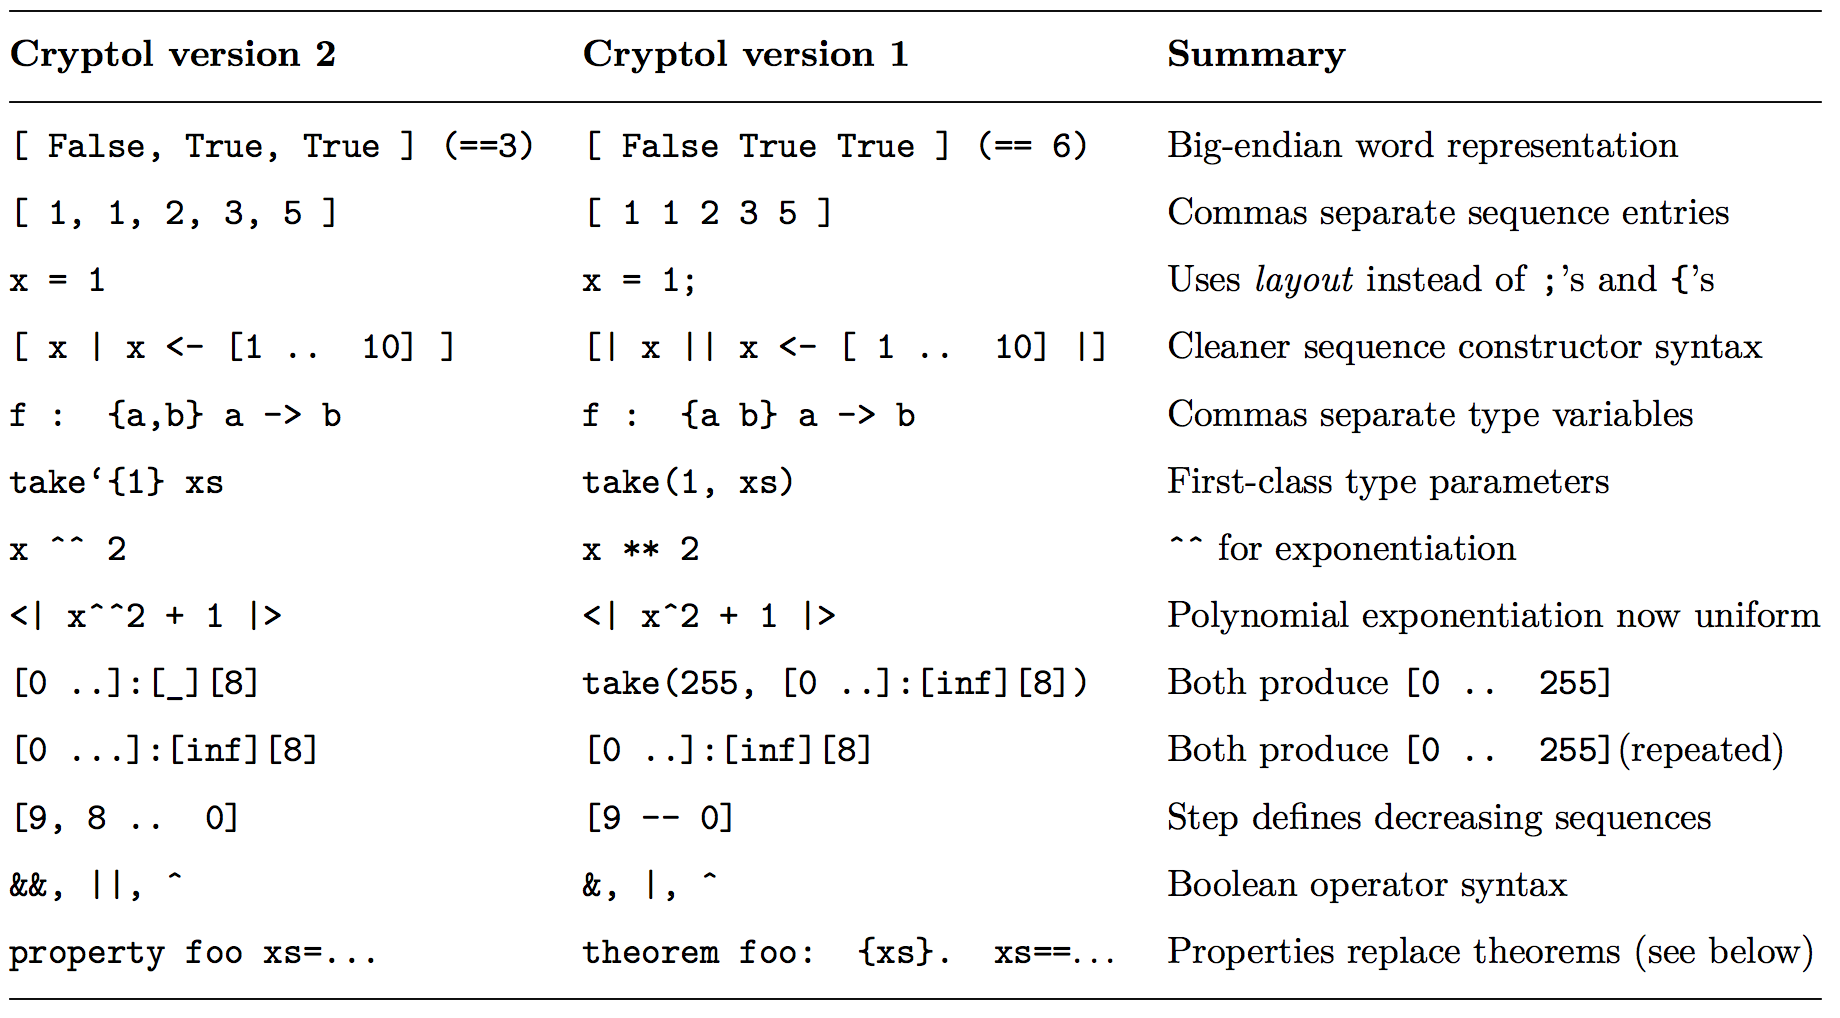 Summary of Changes from Cryptol version 1 to Cryptol version 2